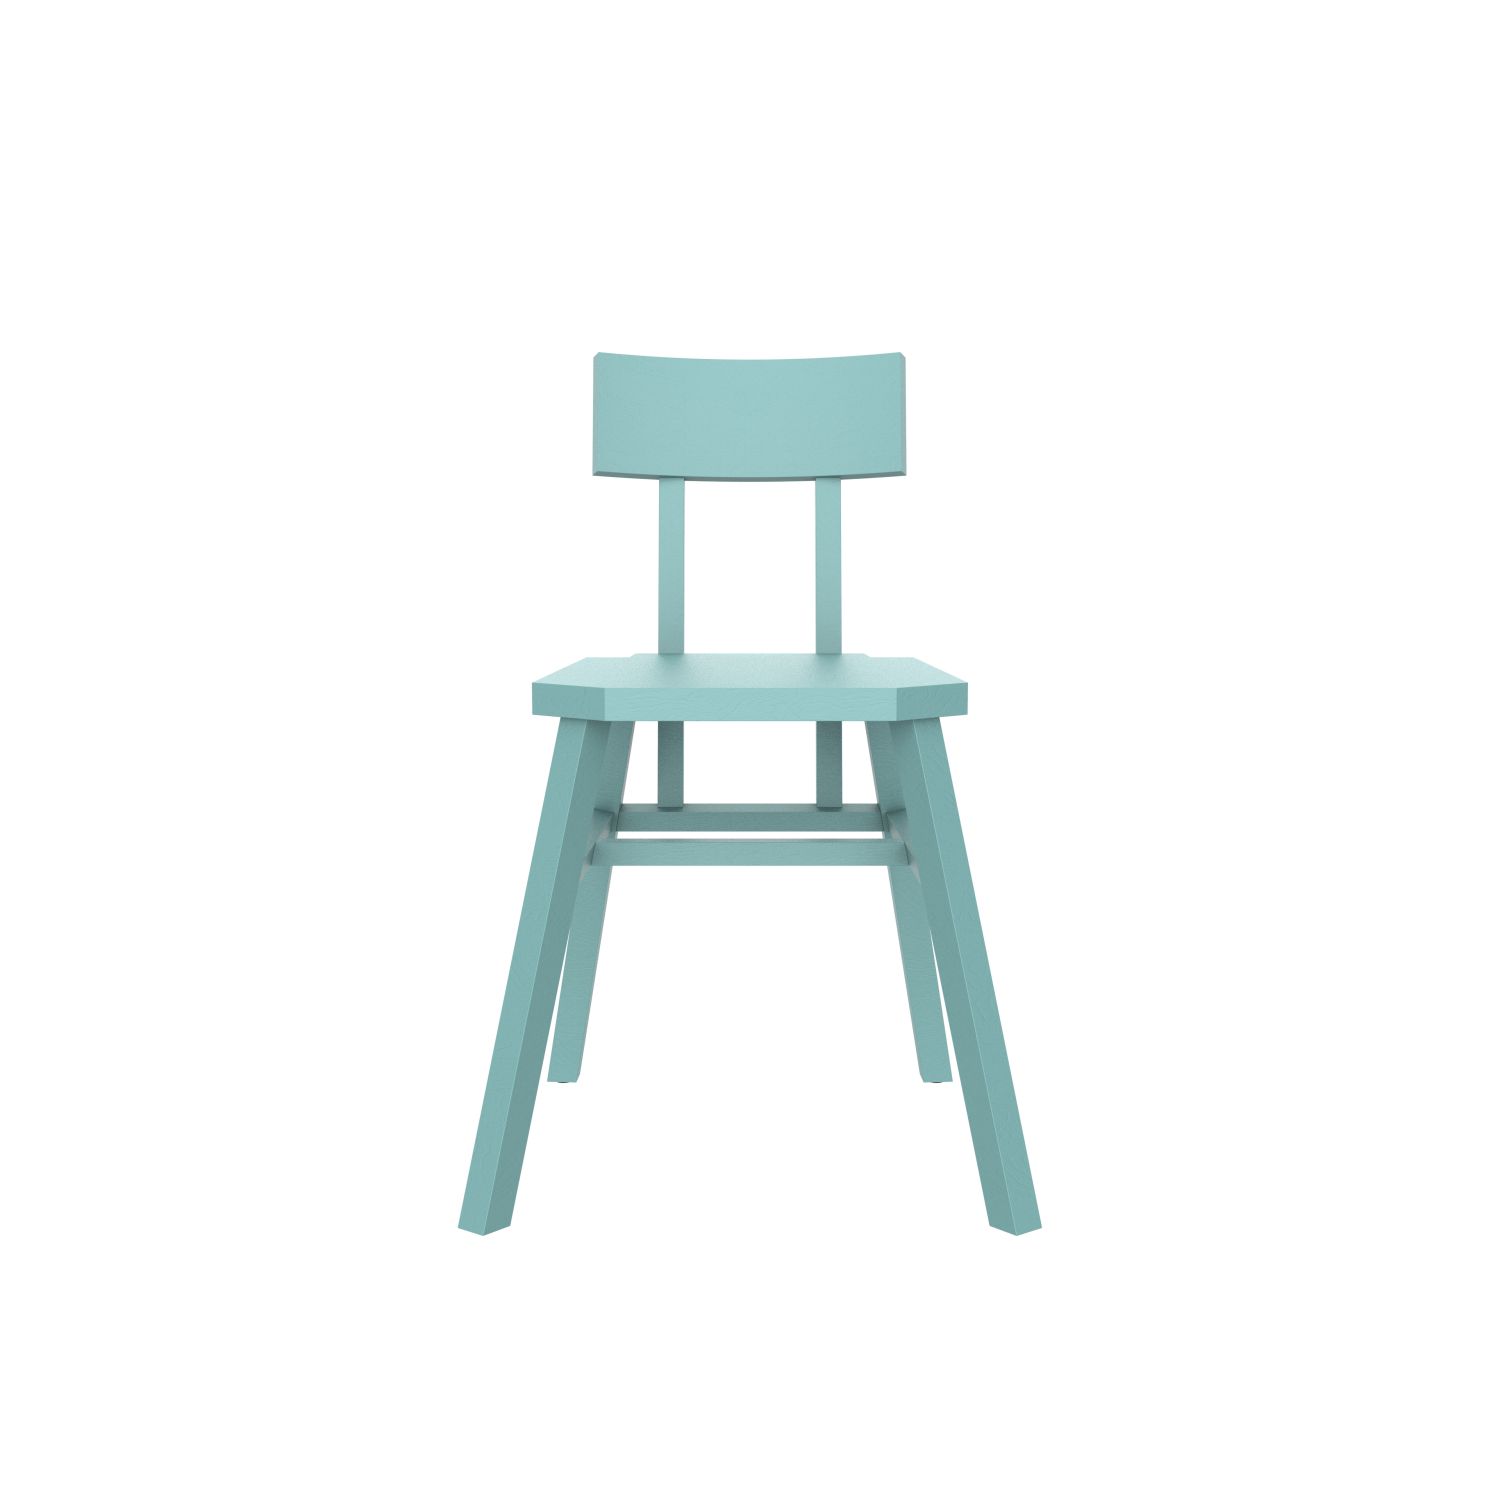 avl spider chair pastel turquoise